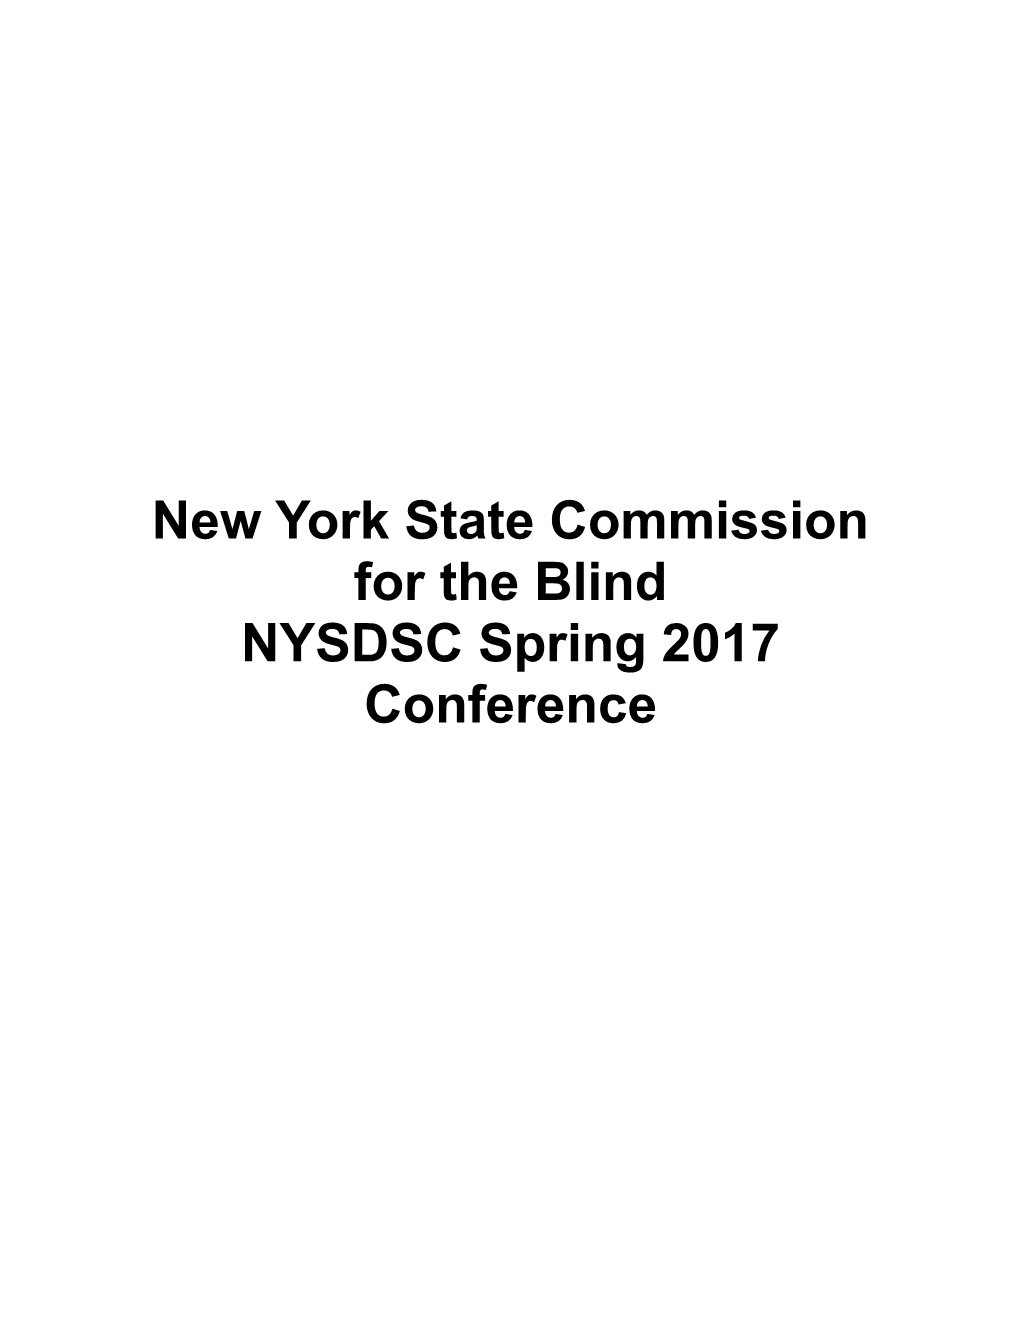 New York State Commission for the Blind